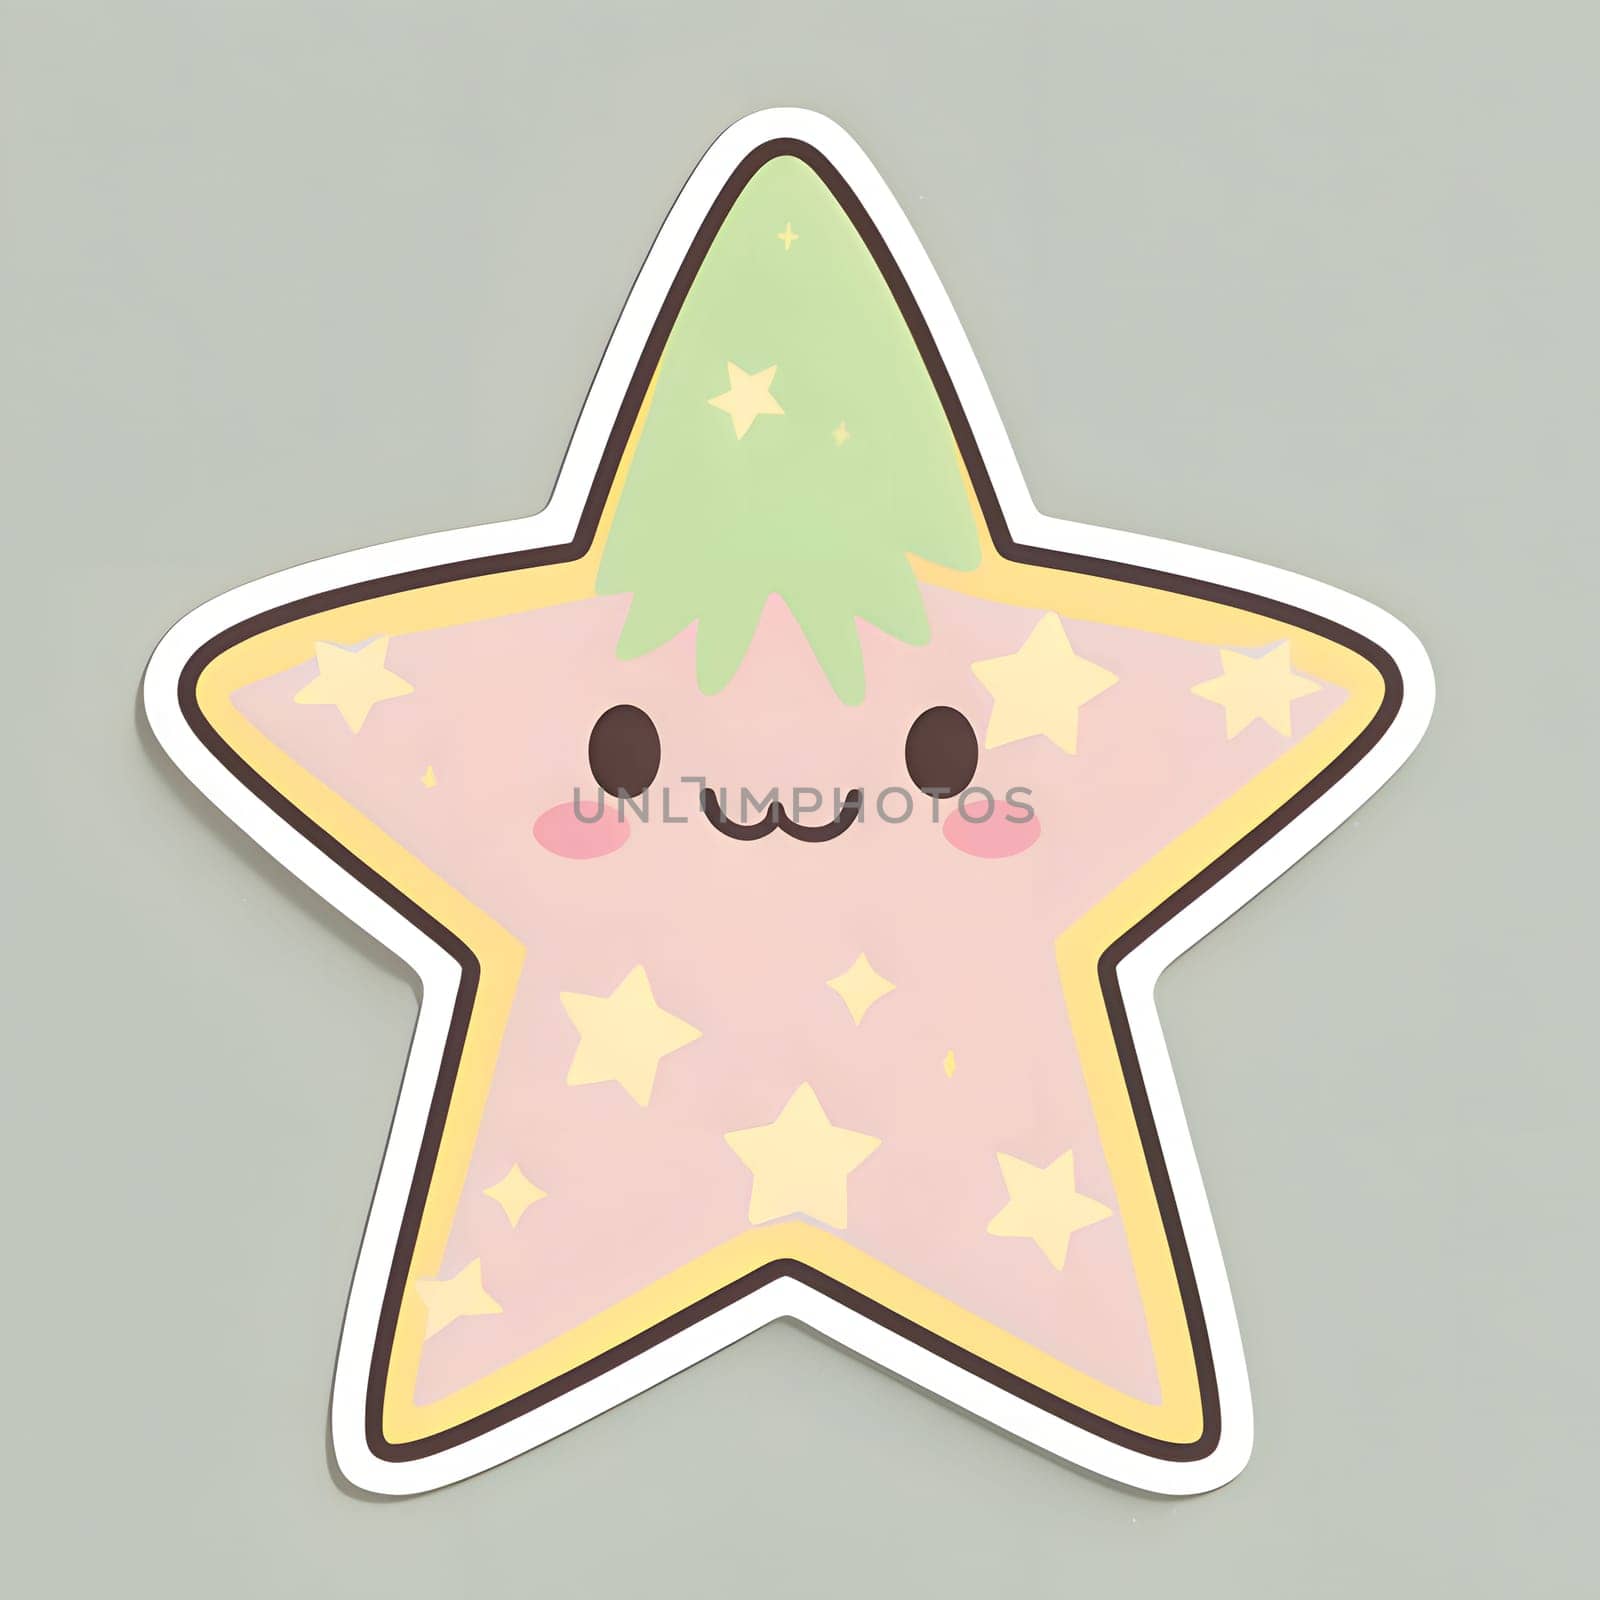 Sticker smiling star on a bright background. The Christmas star as a symbol of the birth of the savior. A Time of Joy and Celebration.